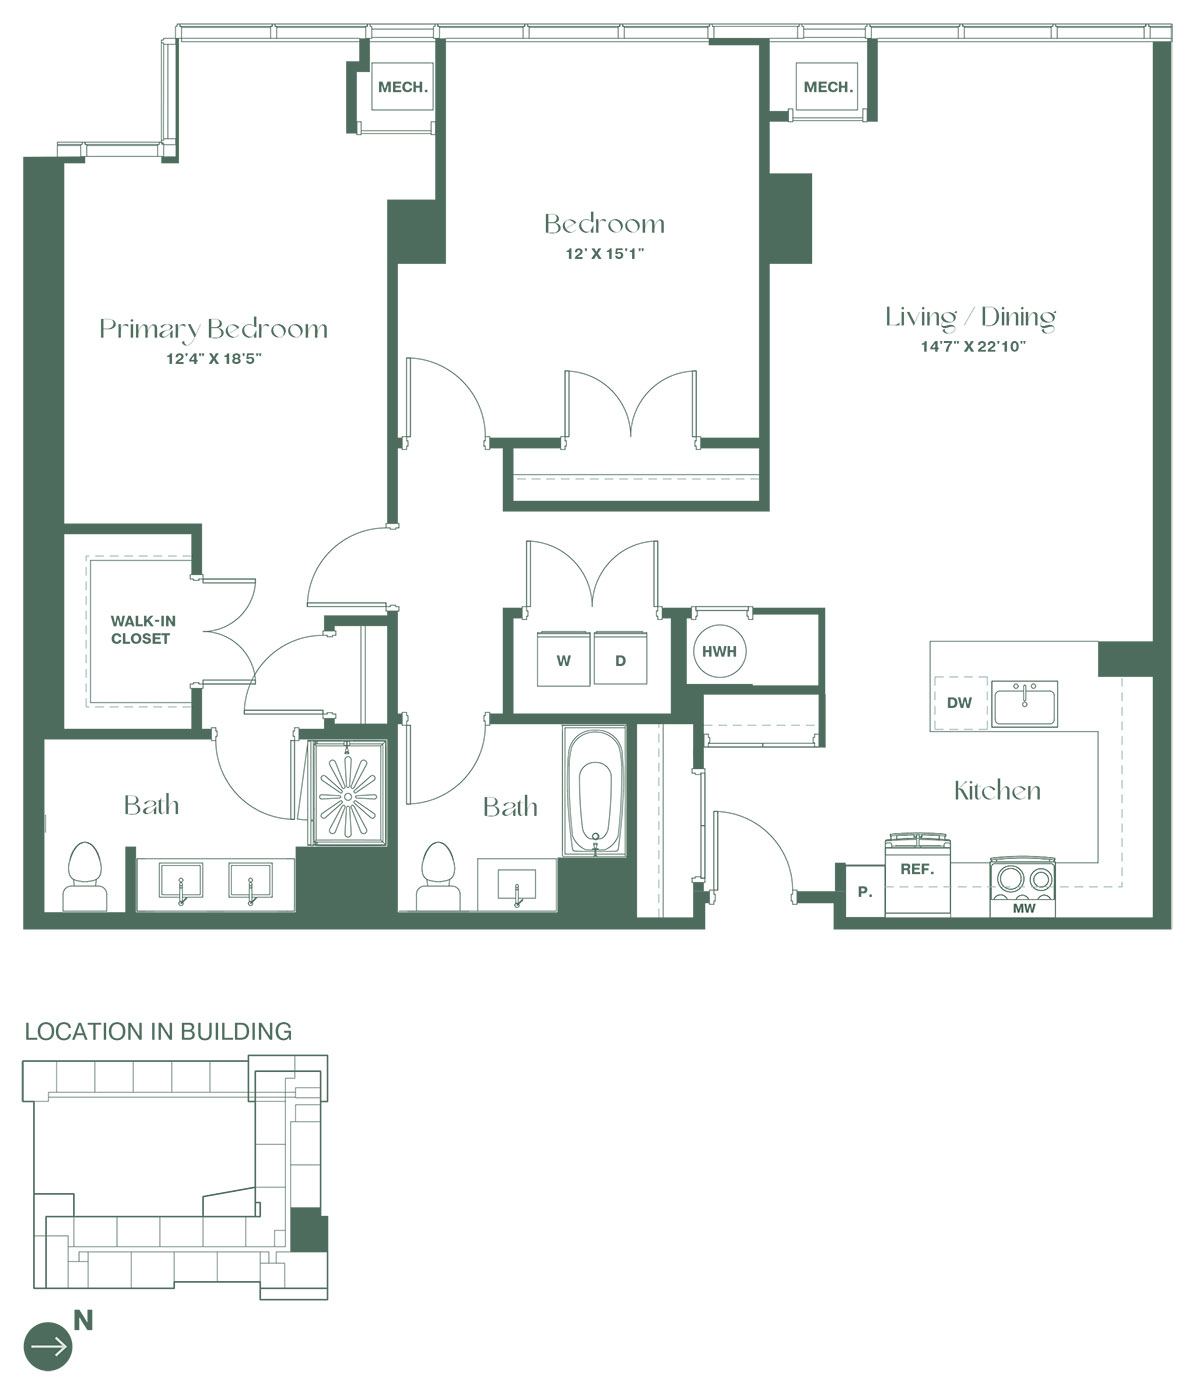 Floorplan for a two-bedroom, two-bathroom apartment at RVR at Xchange opens into a fully equipped kitchen including dishwasher and pantry. Continuing into the apartment there is a spacious living and dining room area, two bedrooms and 2 full bathrooms.